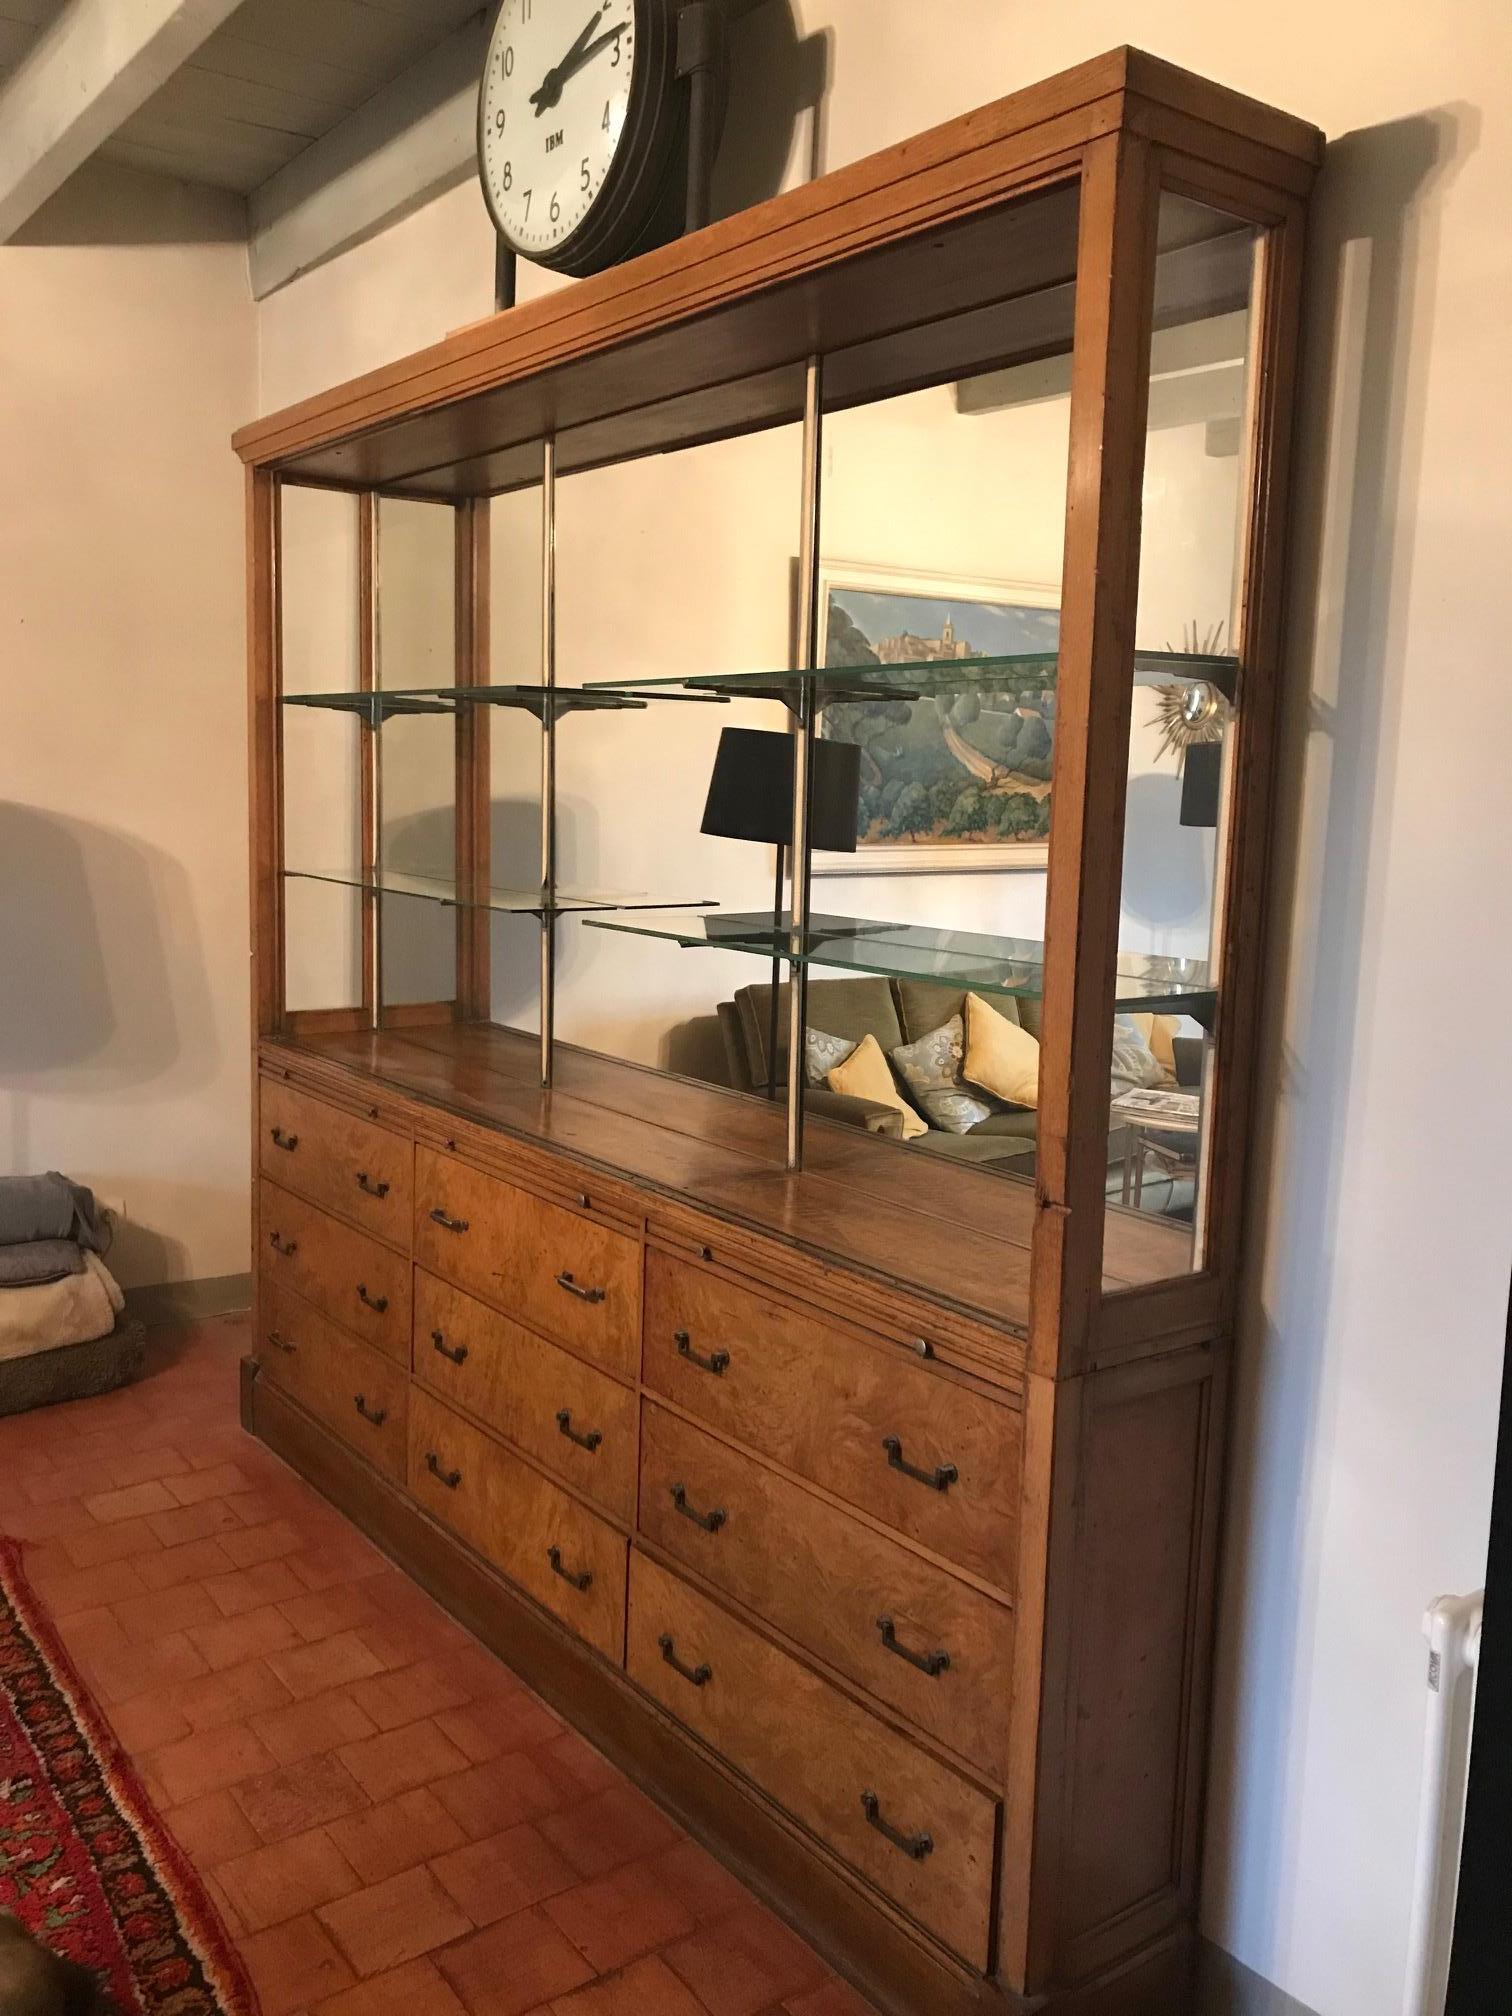 Beautiful 20th century oak and amboyna French apothecary vitrine cabinet from the 1920s.
Used to be a coffee maker cabinet. Made in two parts, large vitrine mirror in the top part with three glass shelves and nine large drawers on the bottom